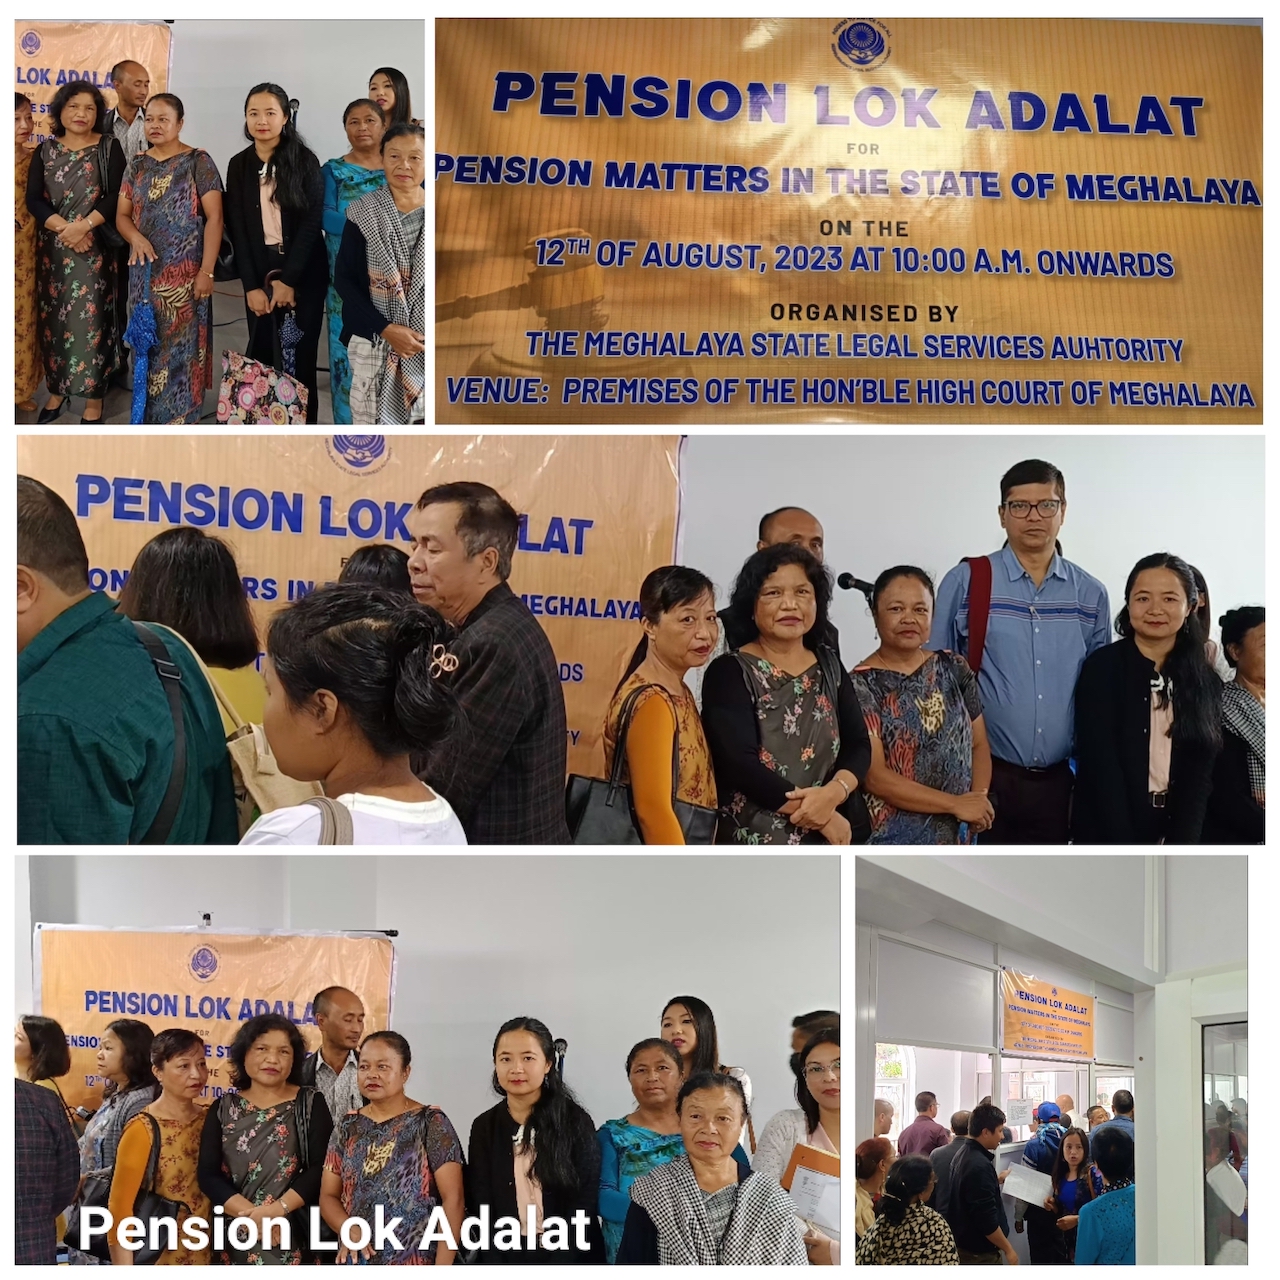 Pension Lok Adalat, Pension matters in the State of Meghalaya on 12.08.2023 organized by The Meghalaya State Legal Services Authority at Premises of the Hon'ble High Court of Meghalaya